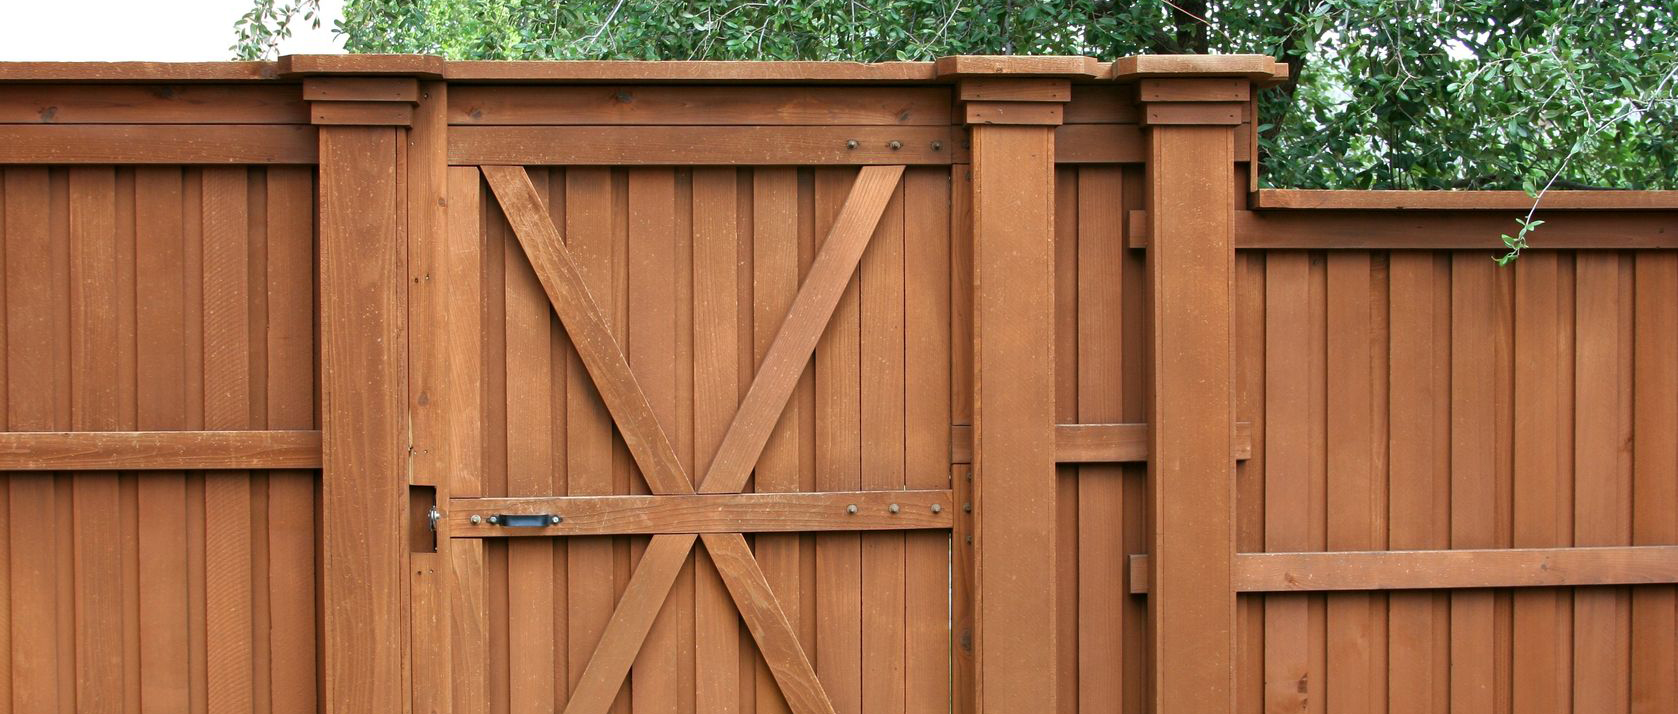 Wooden gated fence